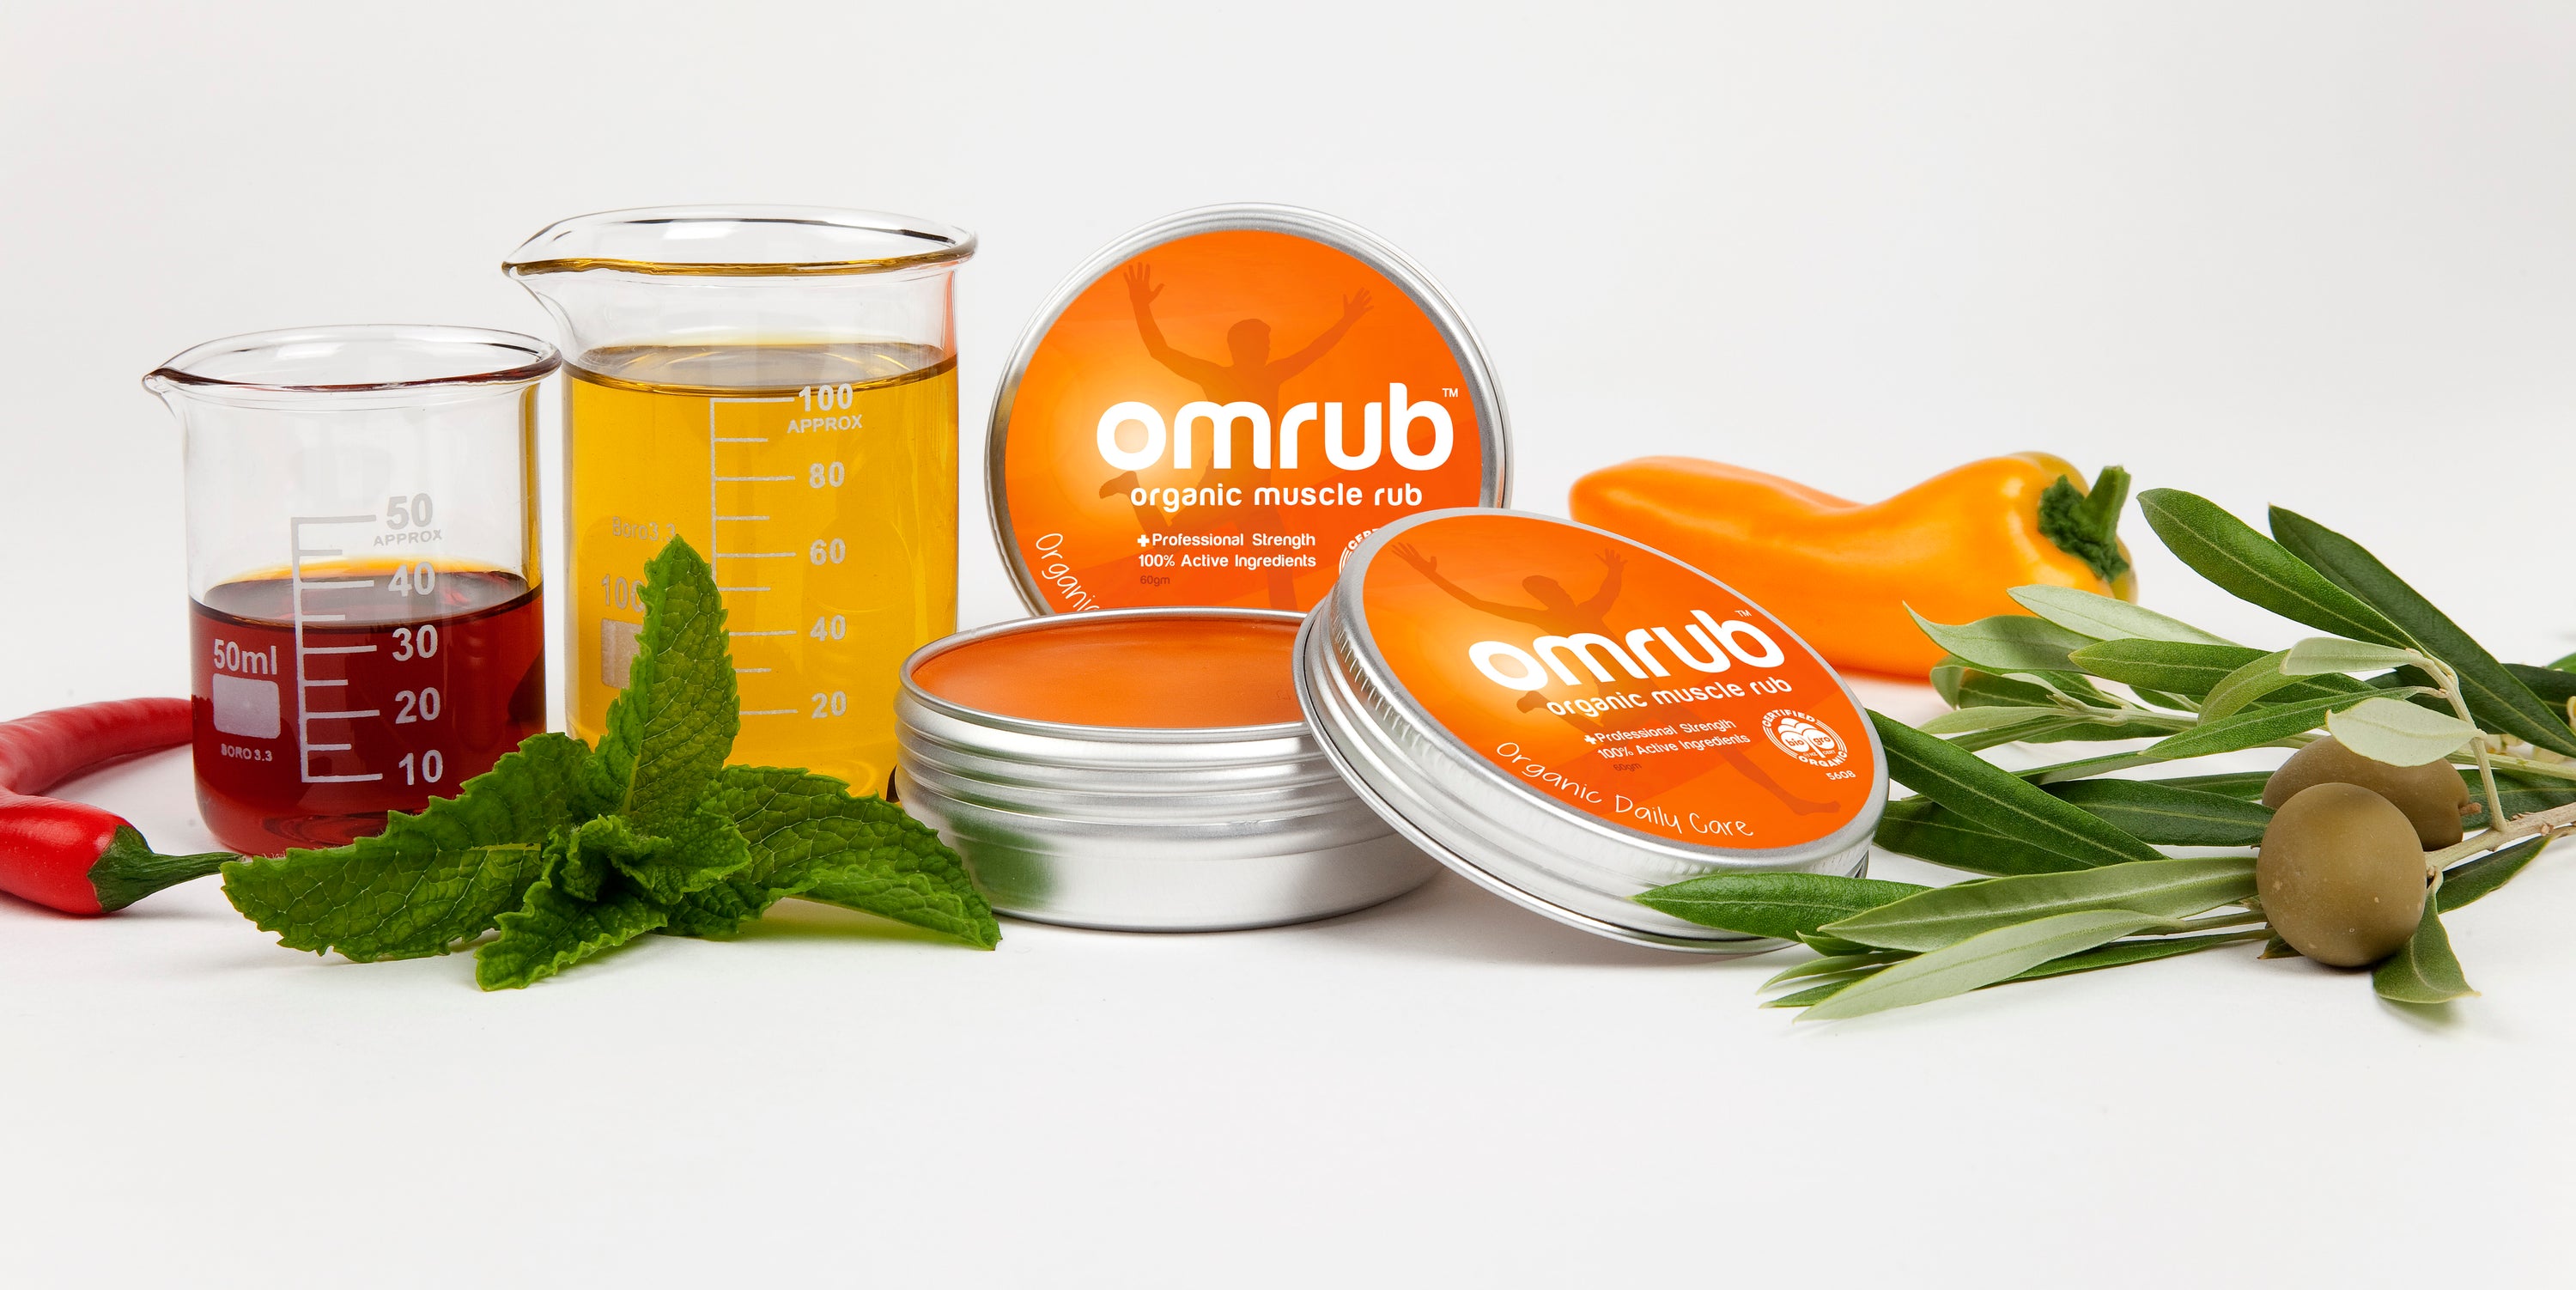 Pain relief for people living with pain: Omrub